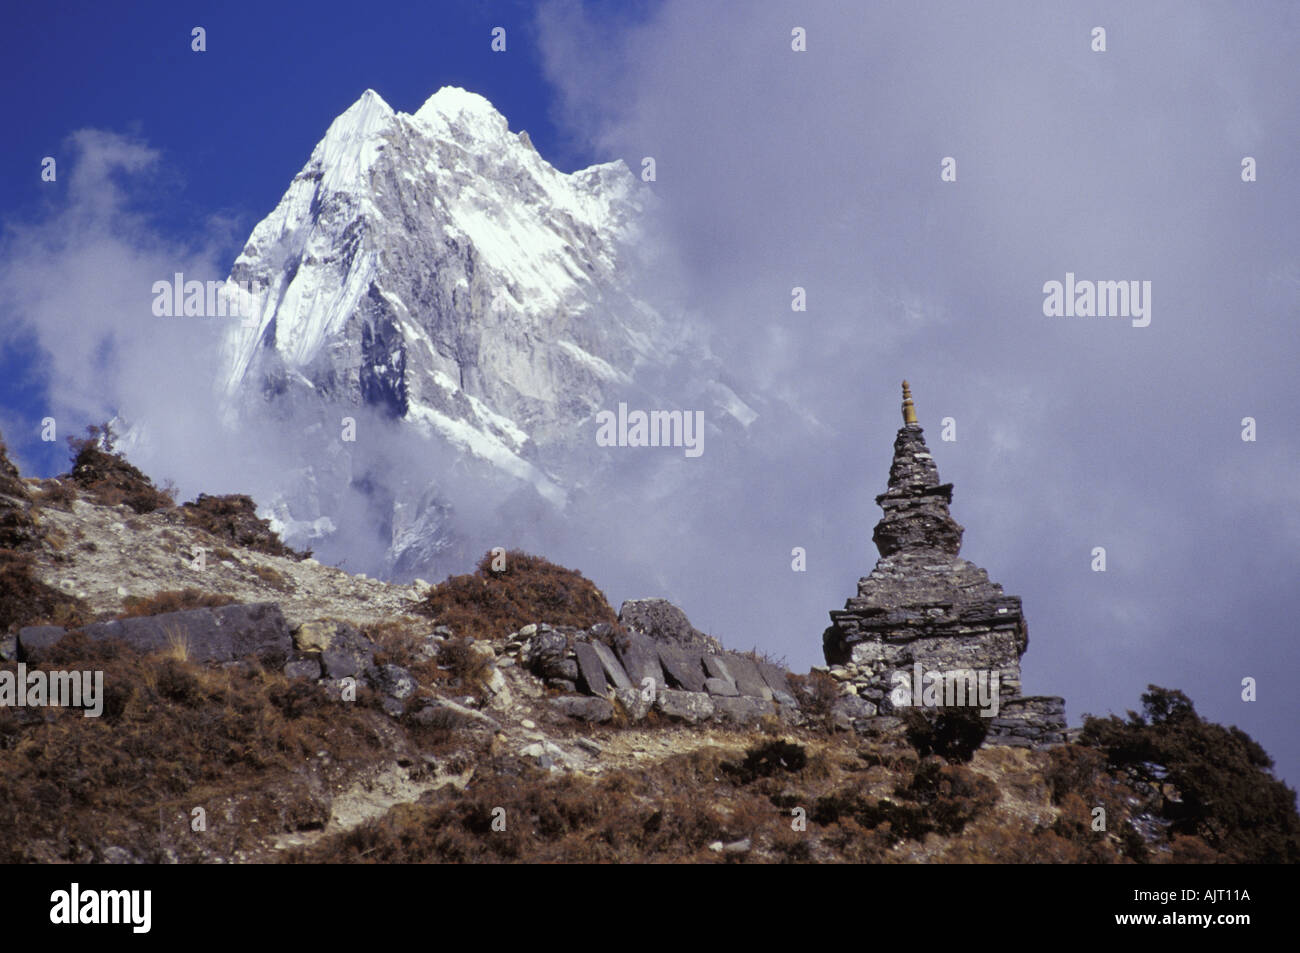 Snow covered peak with cultural monument in forefront Stock Photo